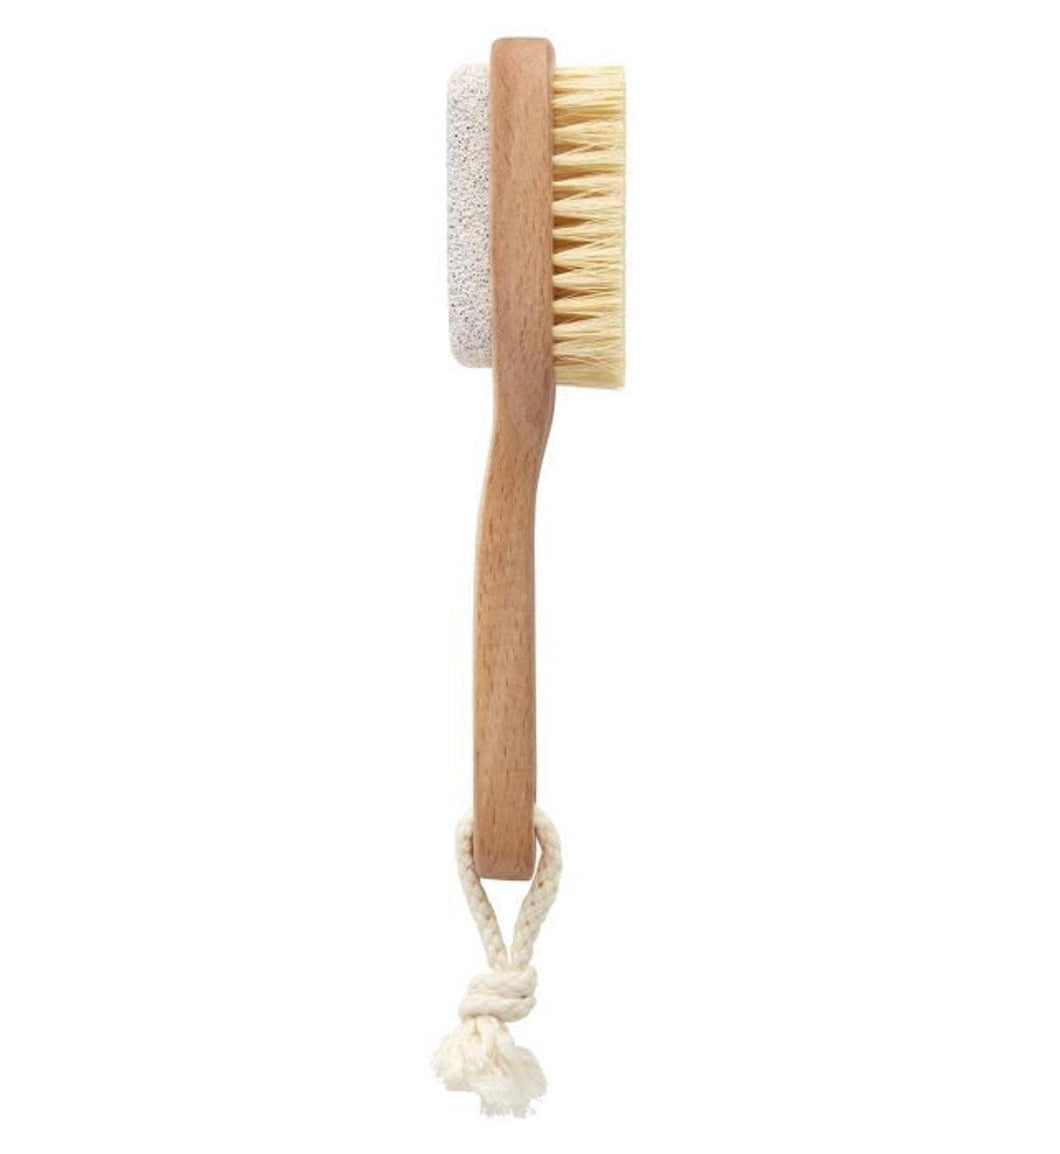 Pumice Stone & Brush Combo with Wooden Handle